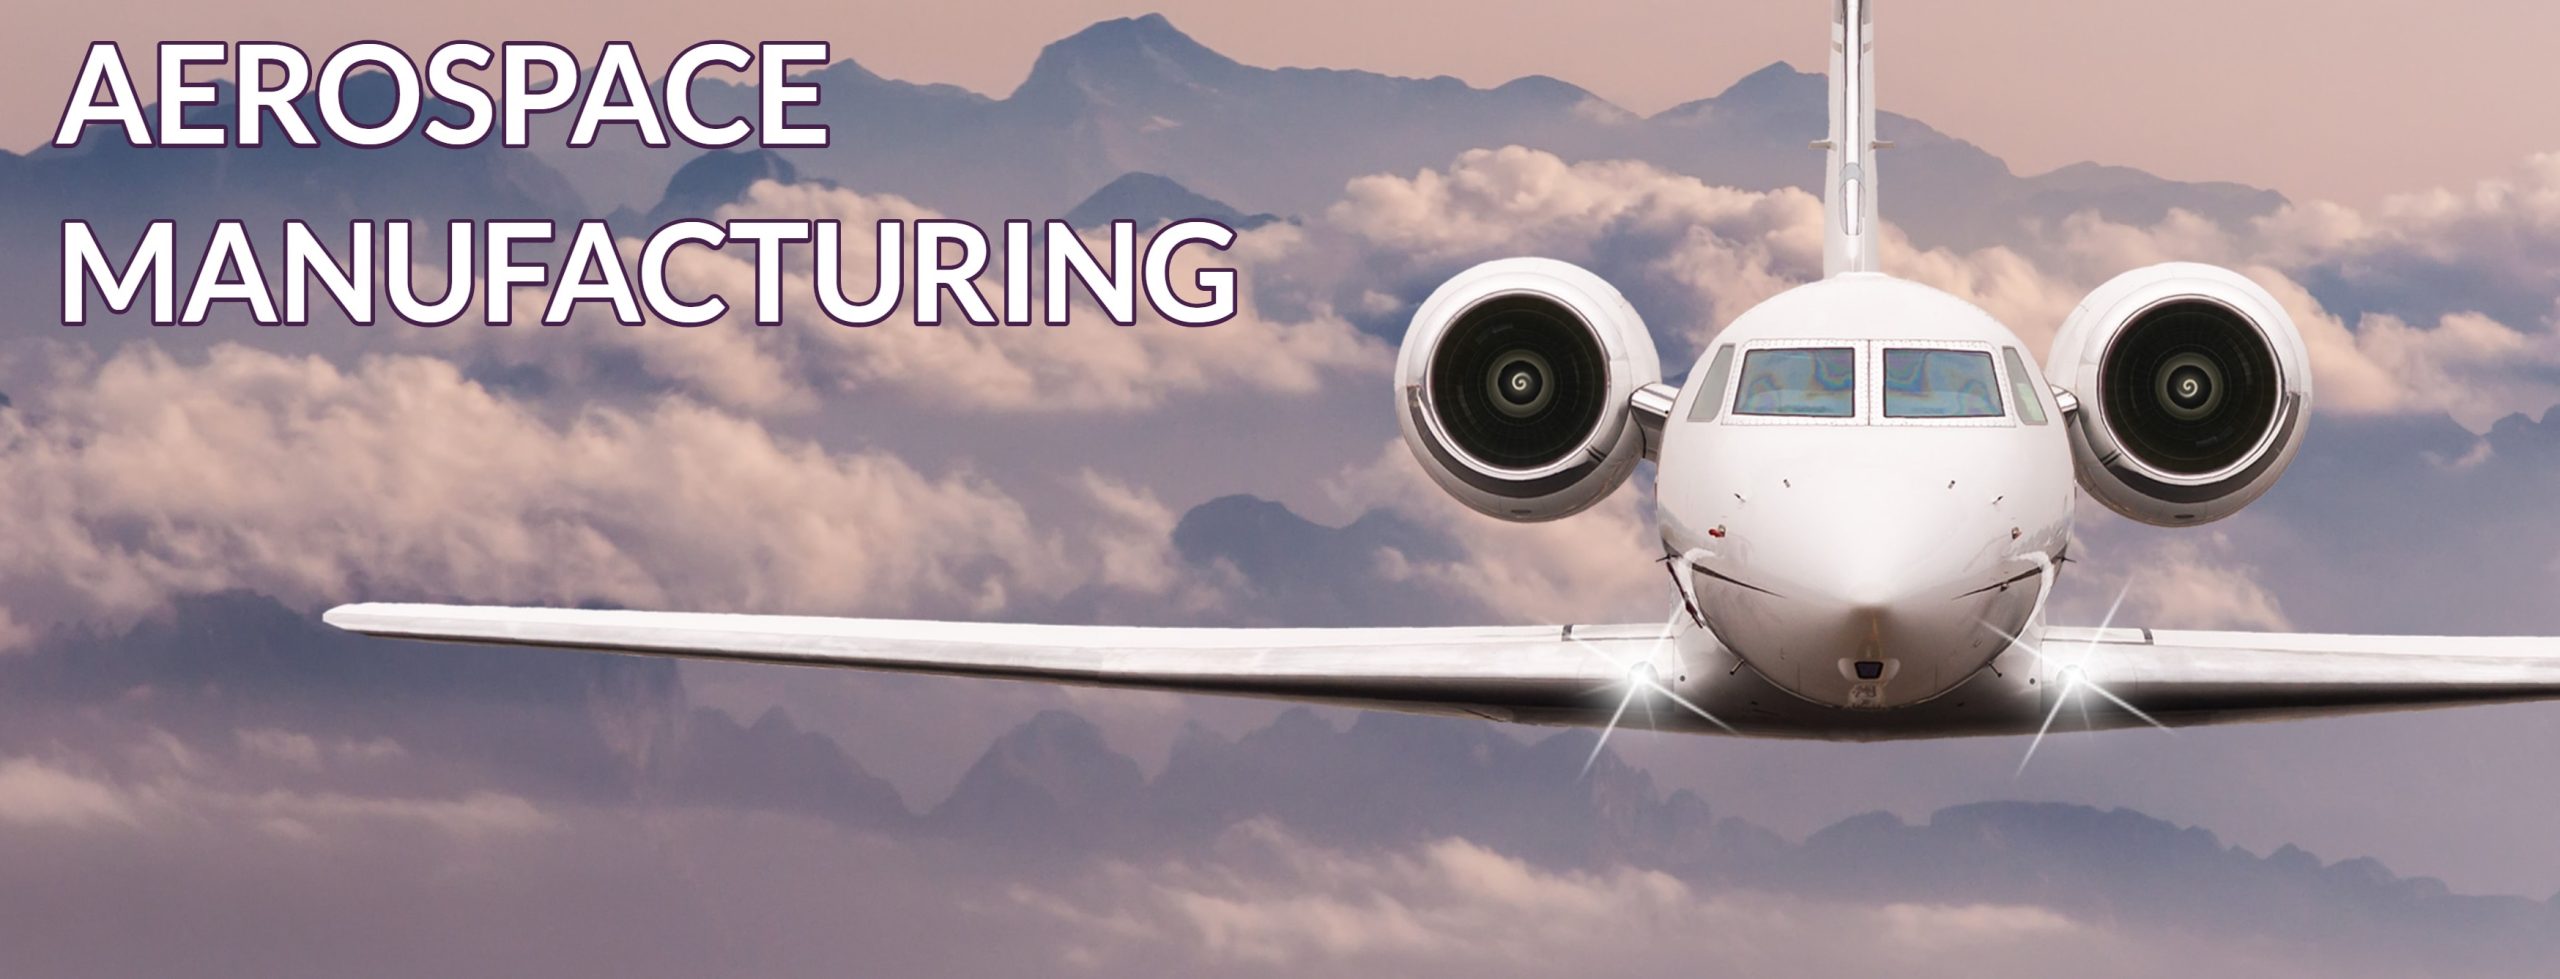 benefits of erp aerospace in manufacturing